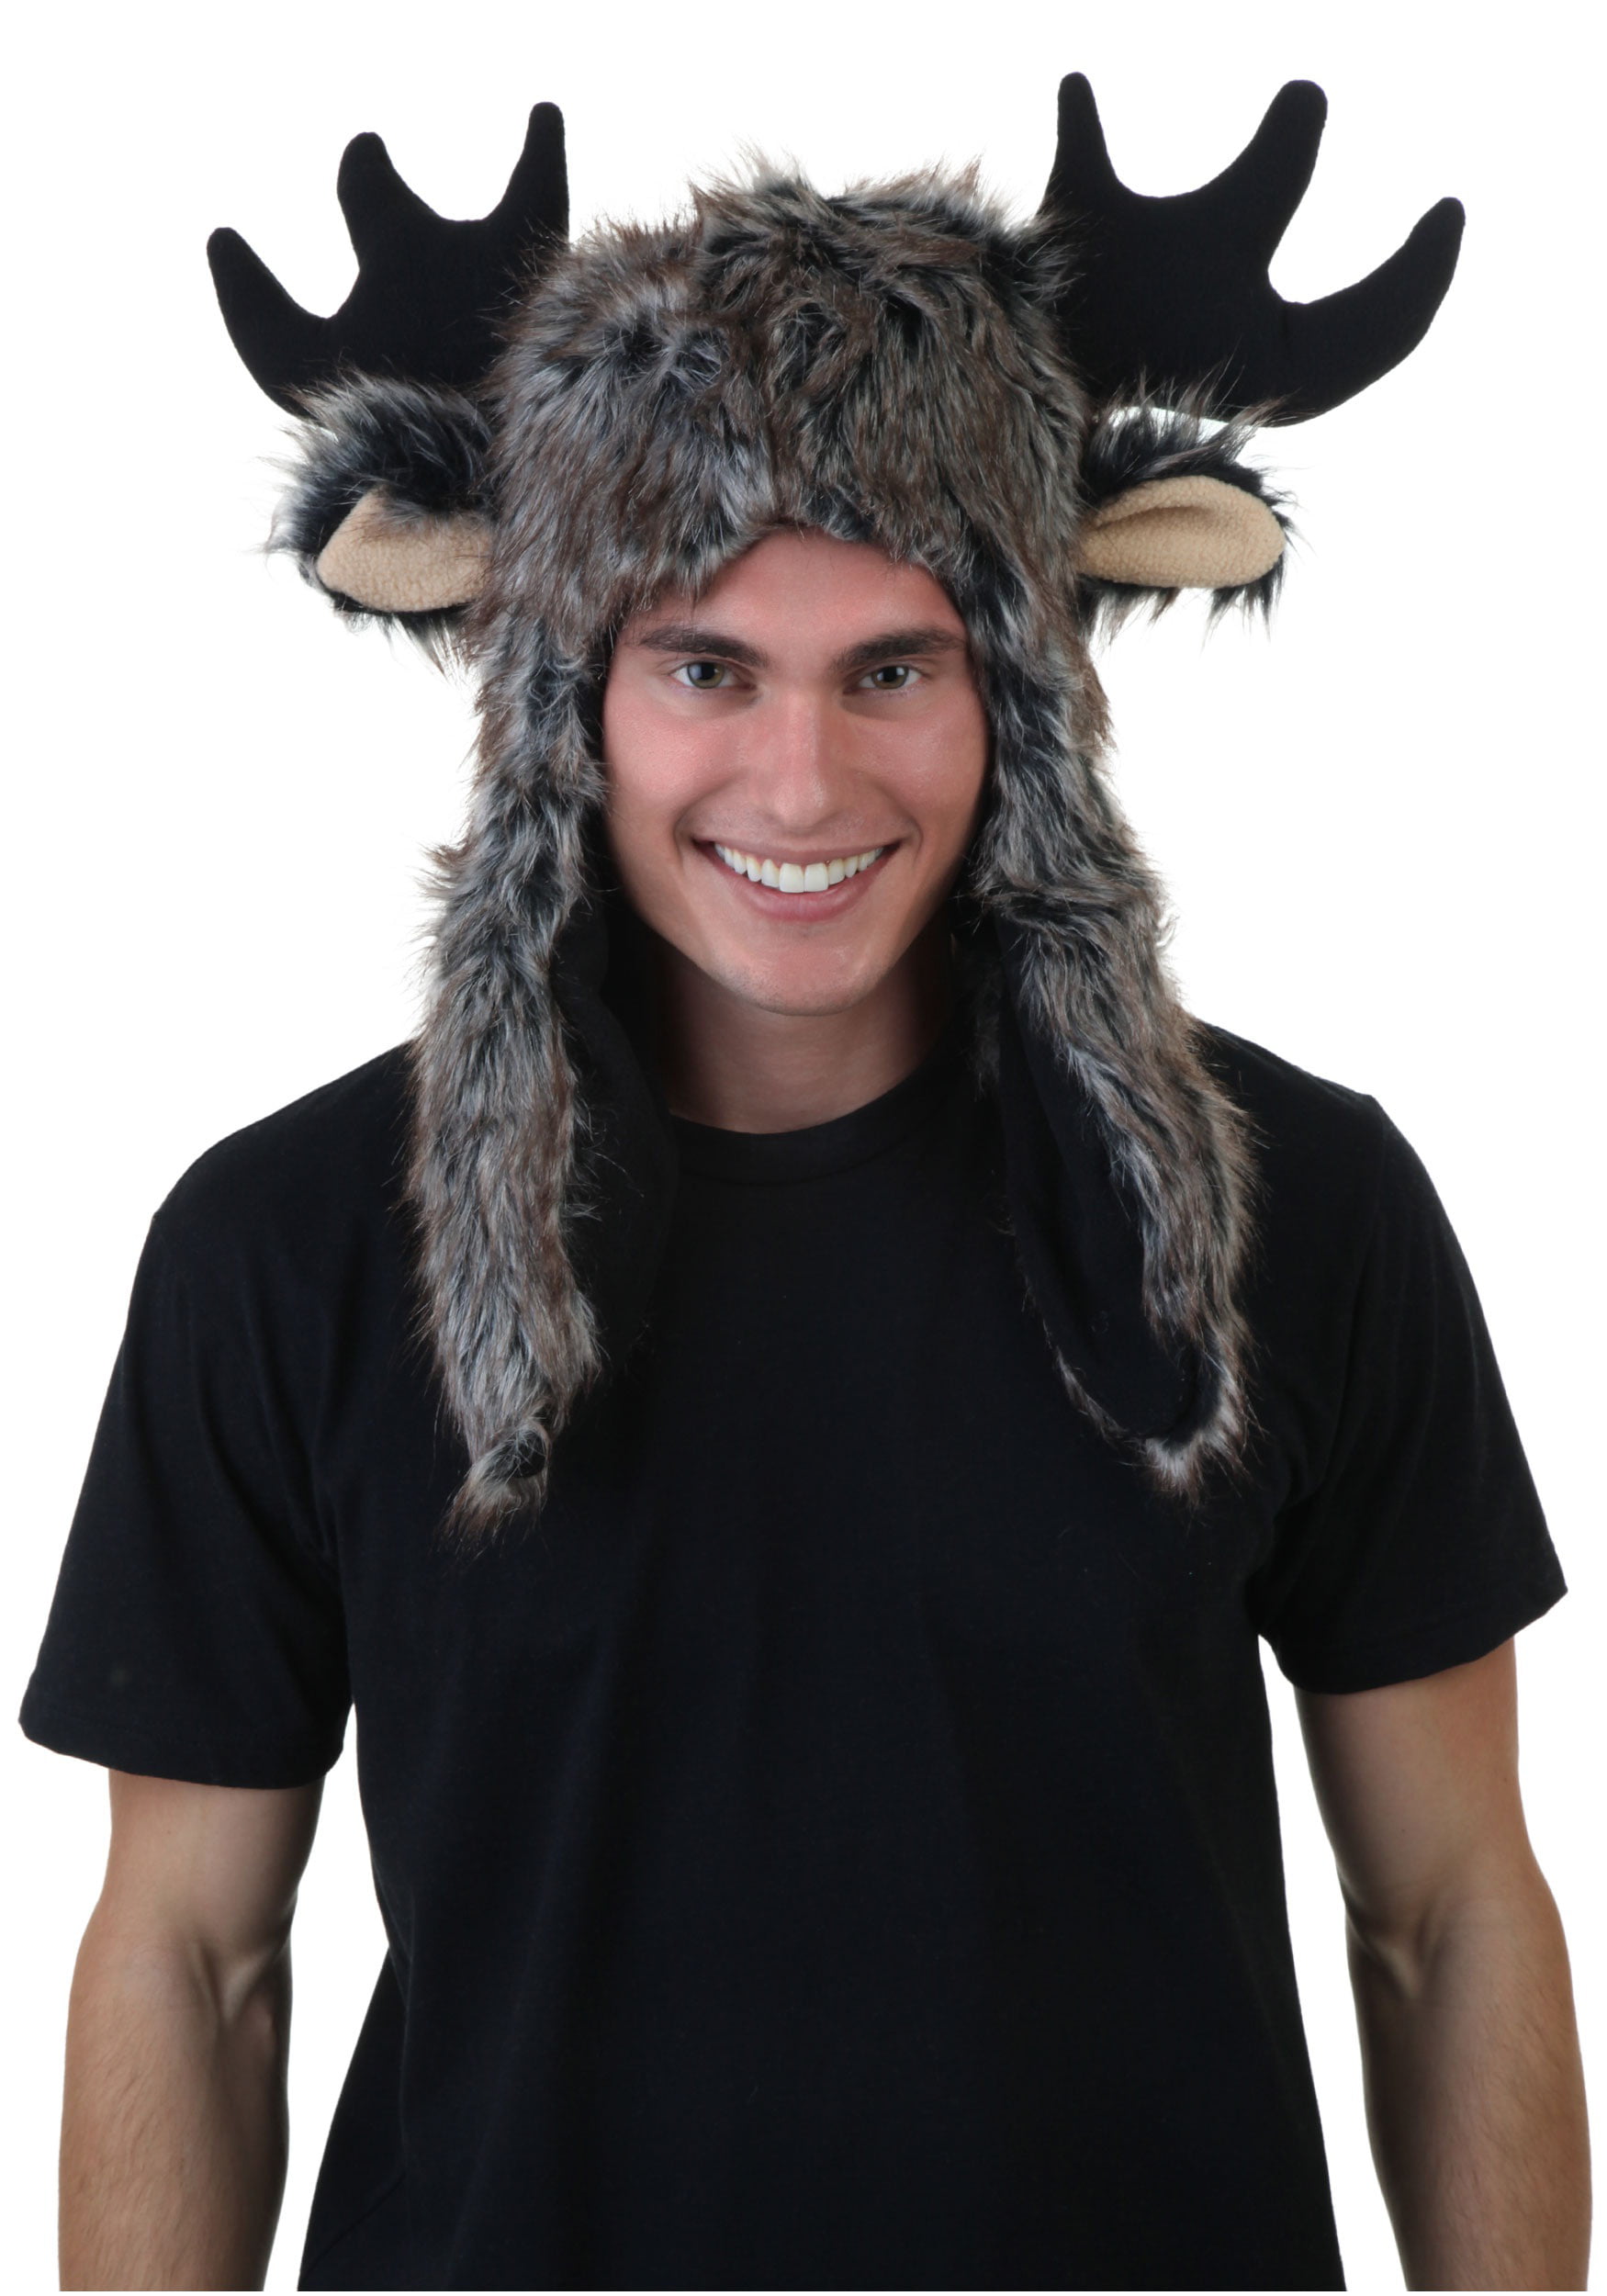 deLux MOOSE HAT knit bull winkle ADULT cap thidwick animal mens womens costume 